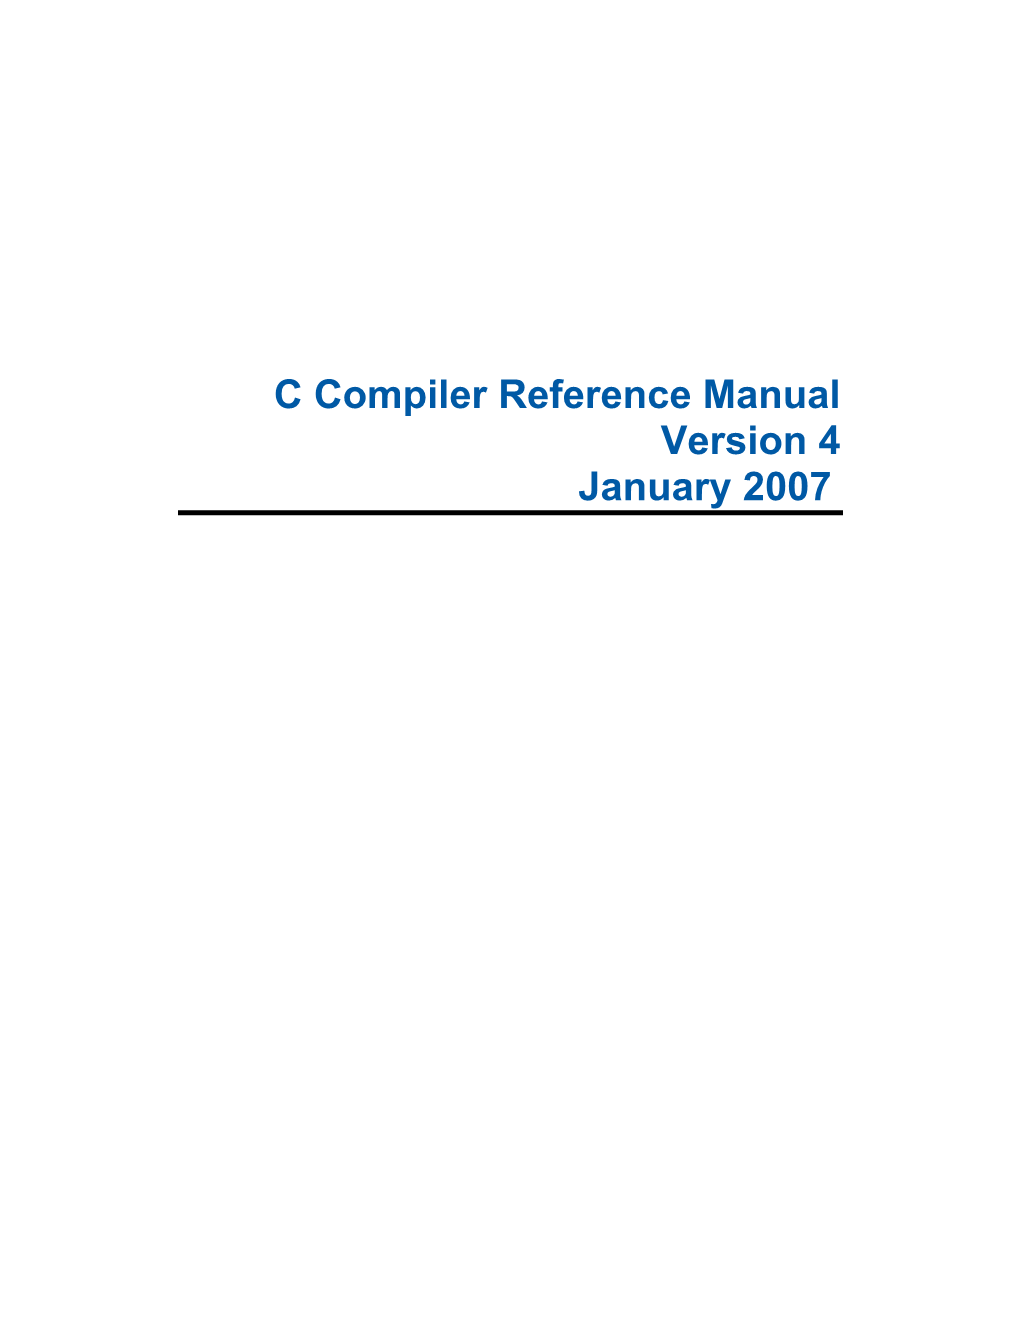 C Compiler Reference Manual Version 4 August 2006